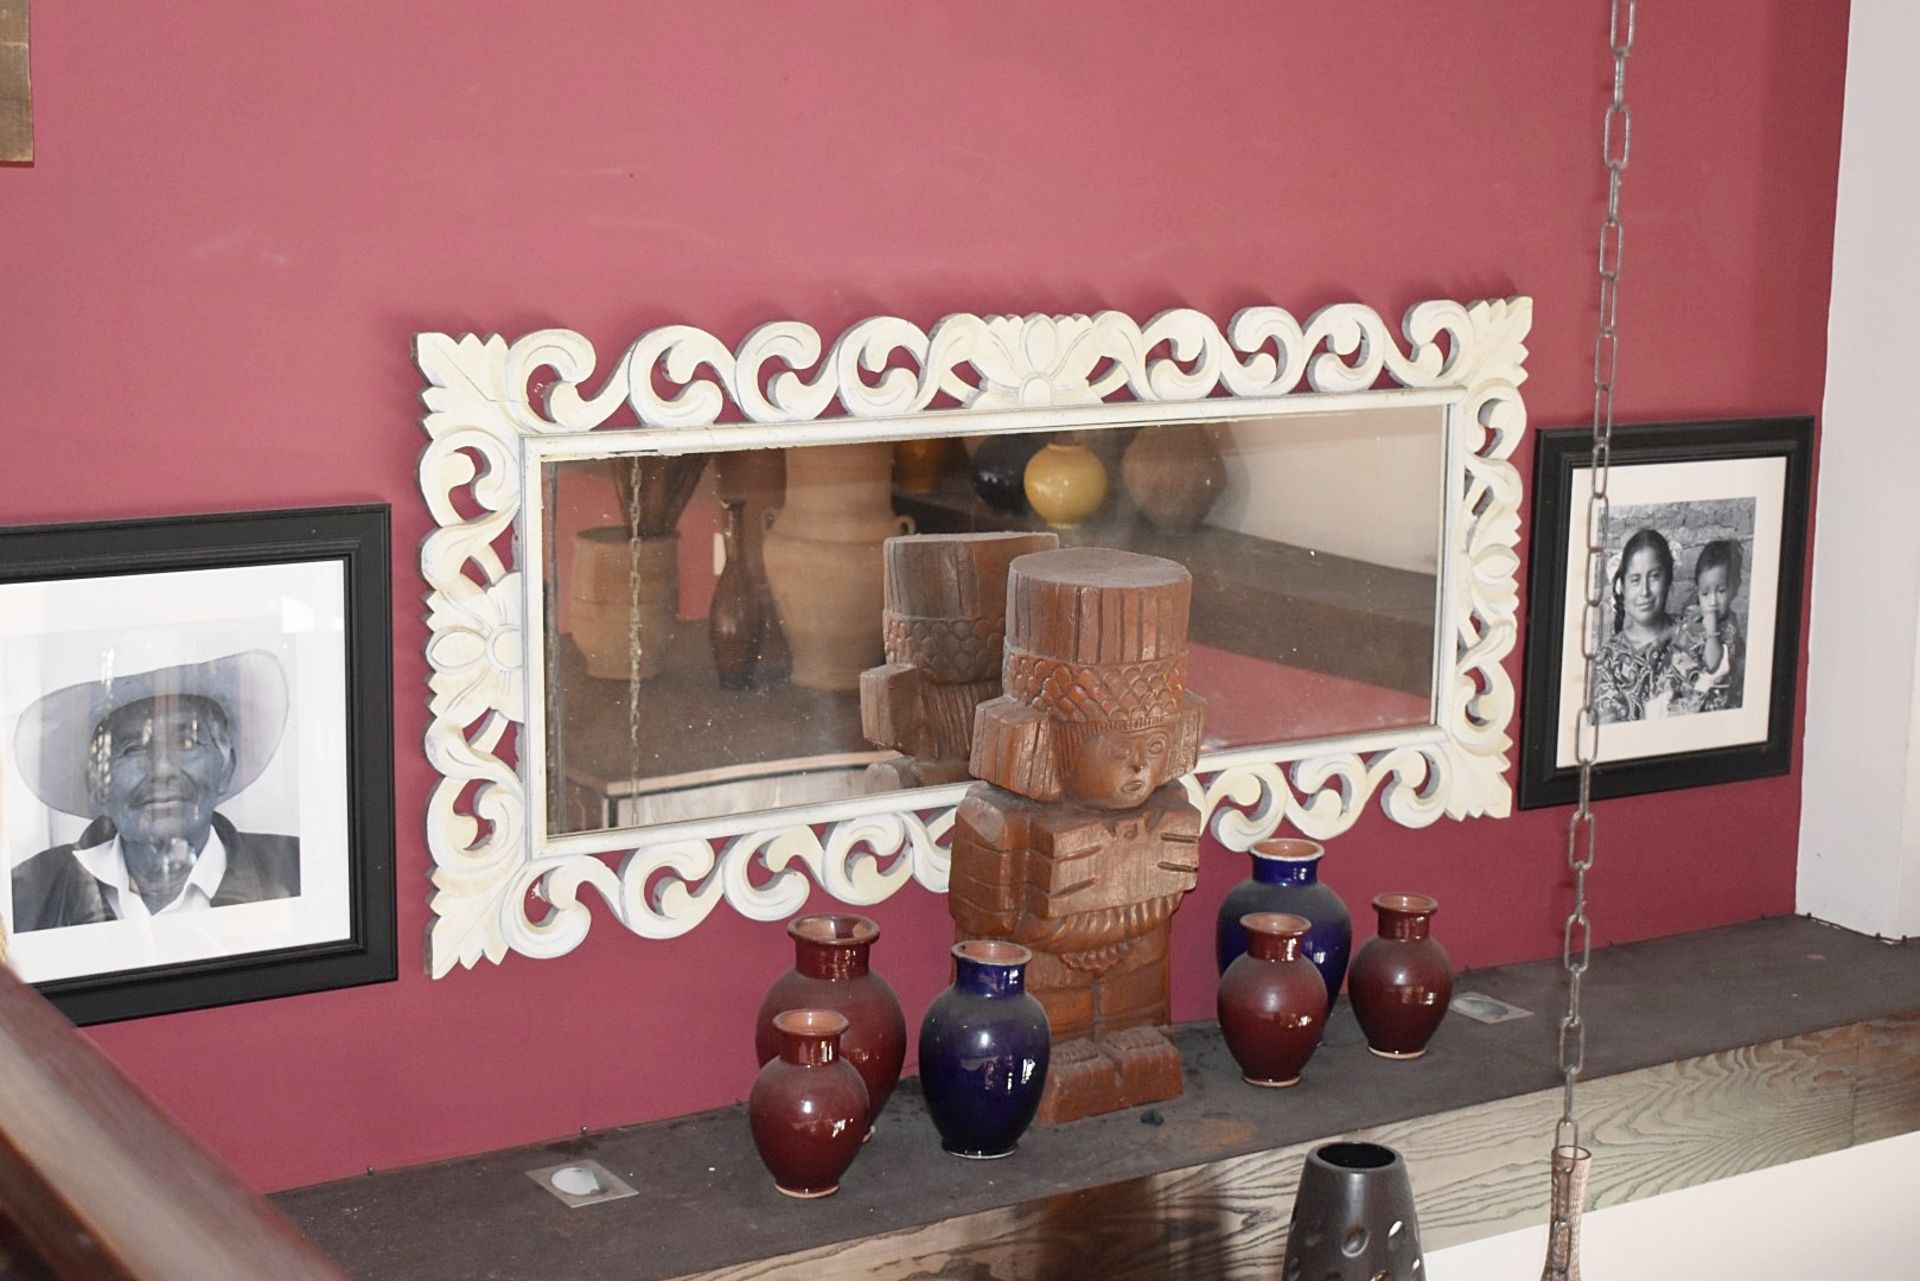 3 x Large Rectangular Wall Mirrors With Ornate Carved Wooden Frames In A Rustic White Wash